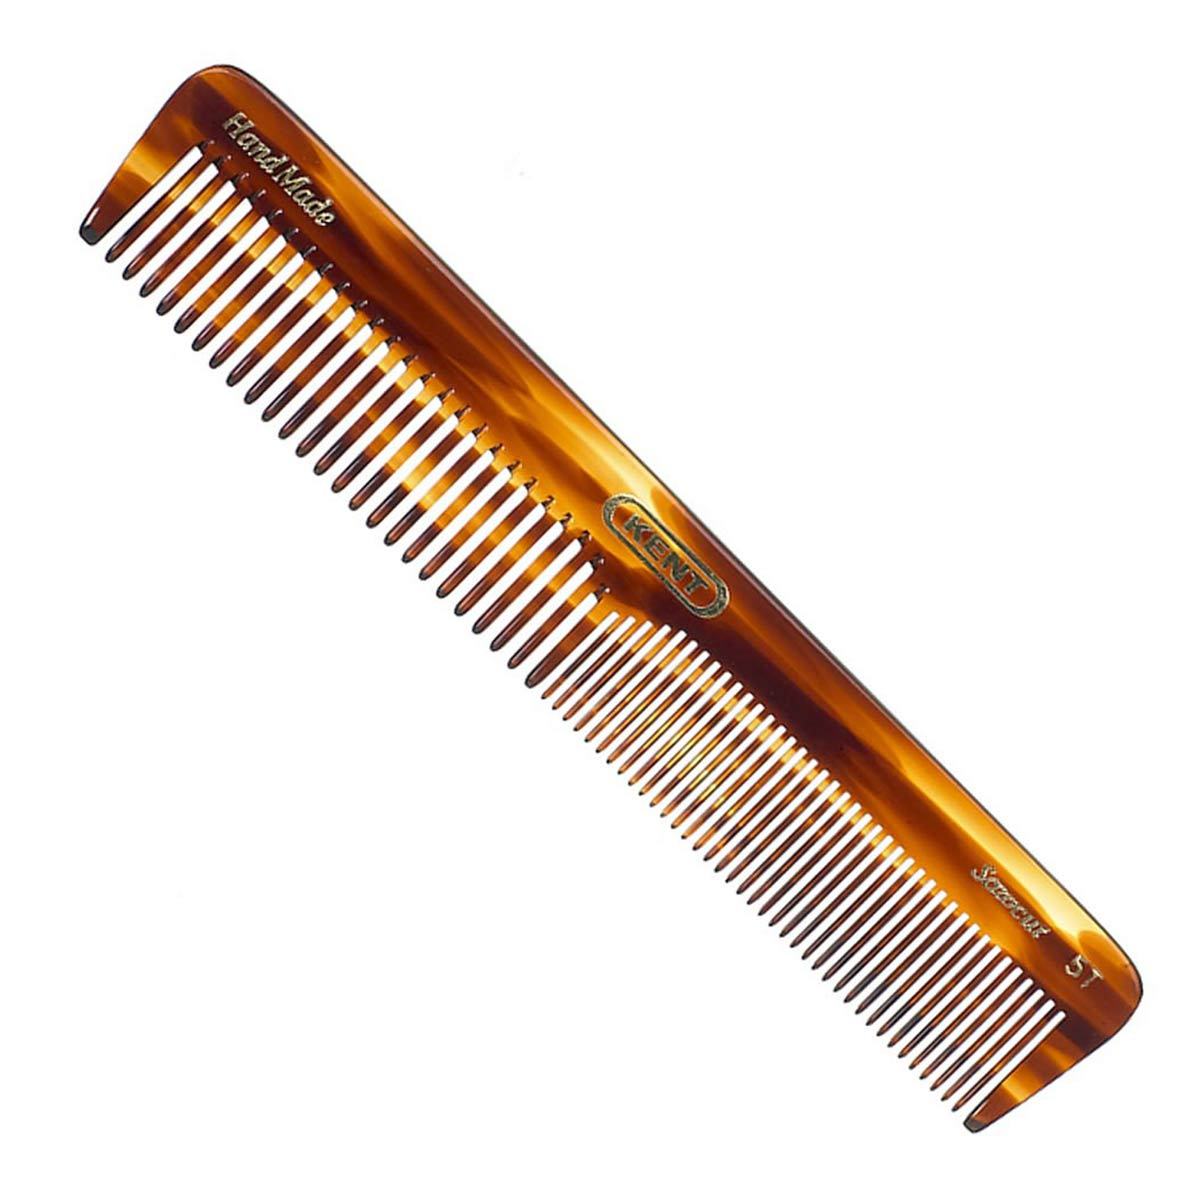 Primary image of 170mm Dressing Table Comb Coarse/Fine - 5T